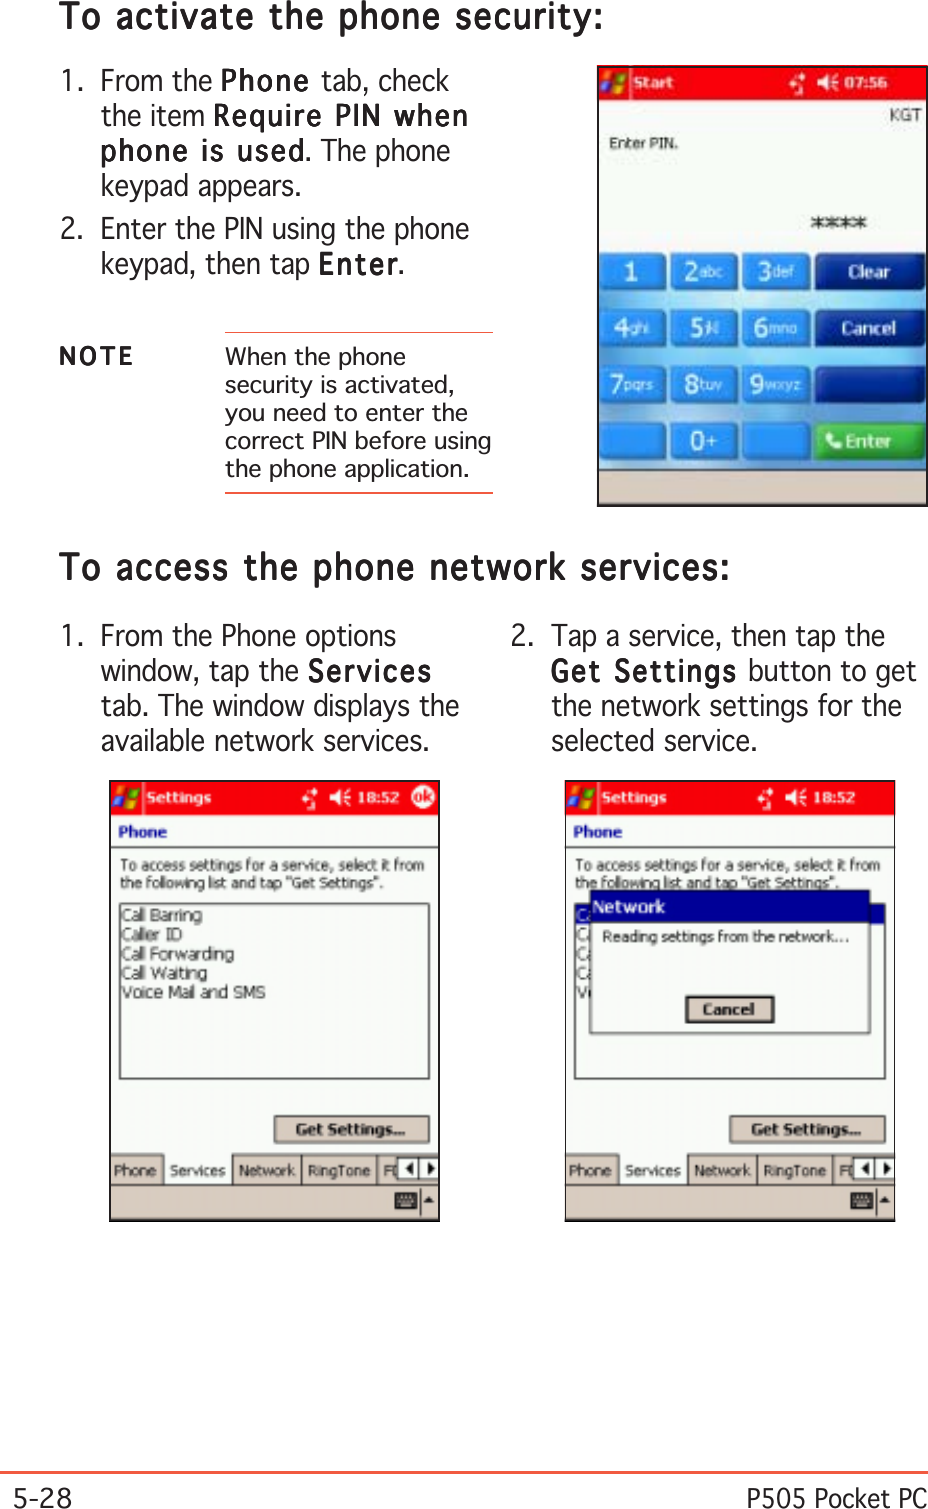 5-28P505 Pocket PC1. From the Phone optionswindow, tap the ServicesServicesServicesServicesServicestab. The window displays theavailable network services.To access the phone network services:To access the phone network services:To access the phone network services:To access the phone network services:To access the phone network services:2. Tap a service, then tap theGet Settings Get Settings Get Settings Get Settings Get Settings button to getthe network settings for theselected service.To activate the phone security:To activate the phone security:To activate the phone security:To activate the phone security:To activate the phone security:1. From the PhonePhonePhonePhonePhone tab, checkthe item Require PIN whenRequire PIN whenRequire PIN whenRequire PIN whenRequire PIN whenphone is usedphone is usedphone is usedphone is usedphone is used. The phonekeypad appears.2. Enter the PIN using the phonekeypad, then tap EnterEnterEnterEnterEnter.NOTENOTENOTENOTEN O T E When the phonesecurity is activated,you need to enter thecorrect PIN before usingthe phone application.